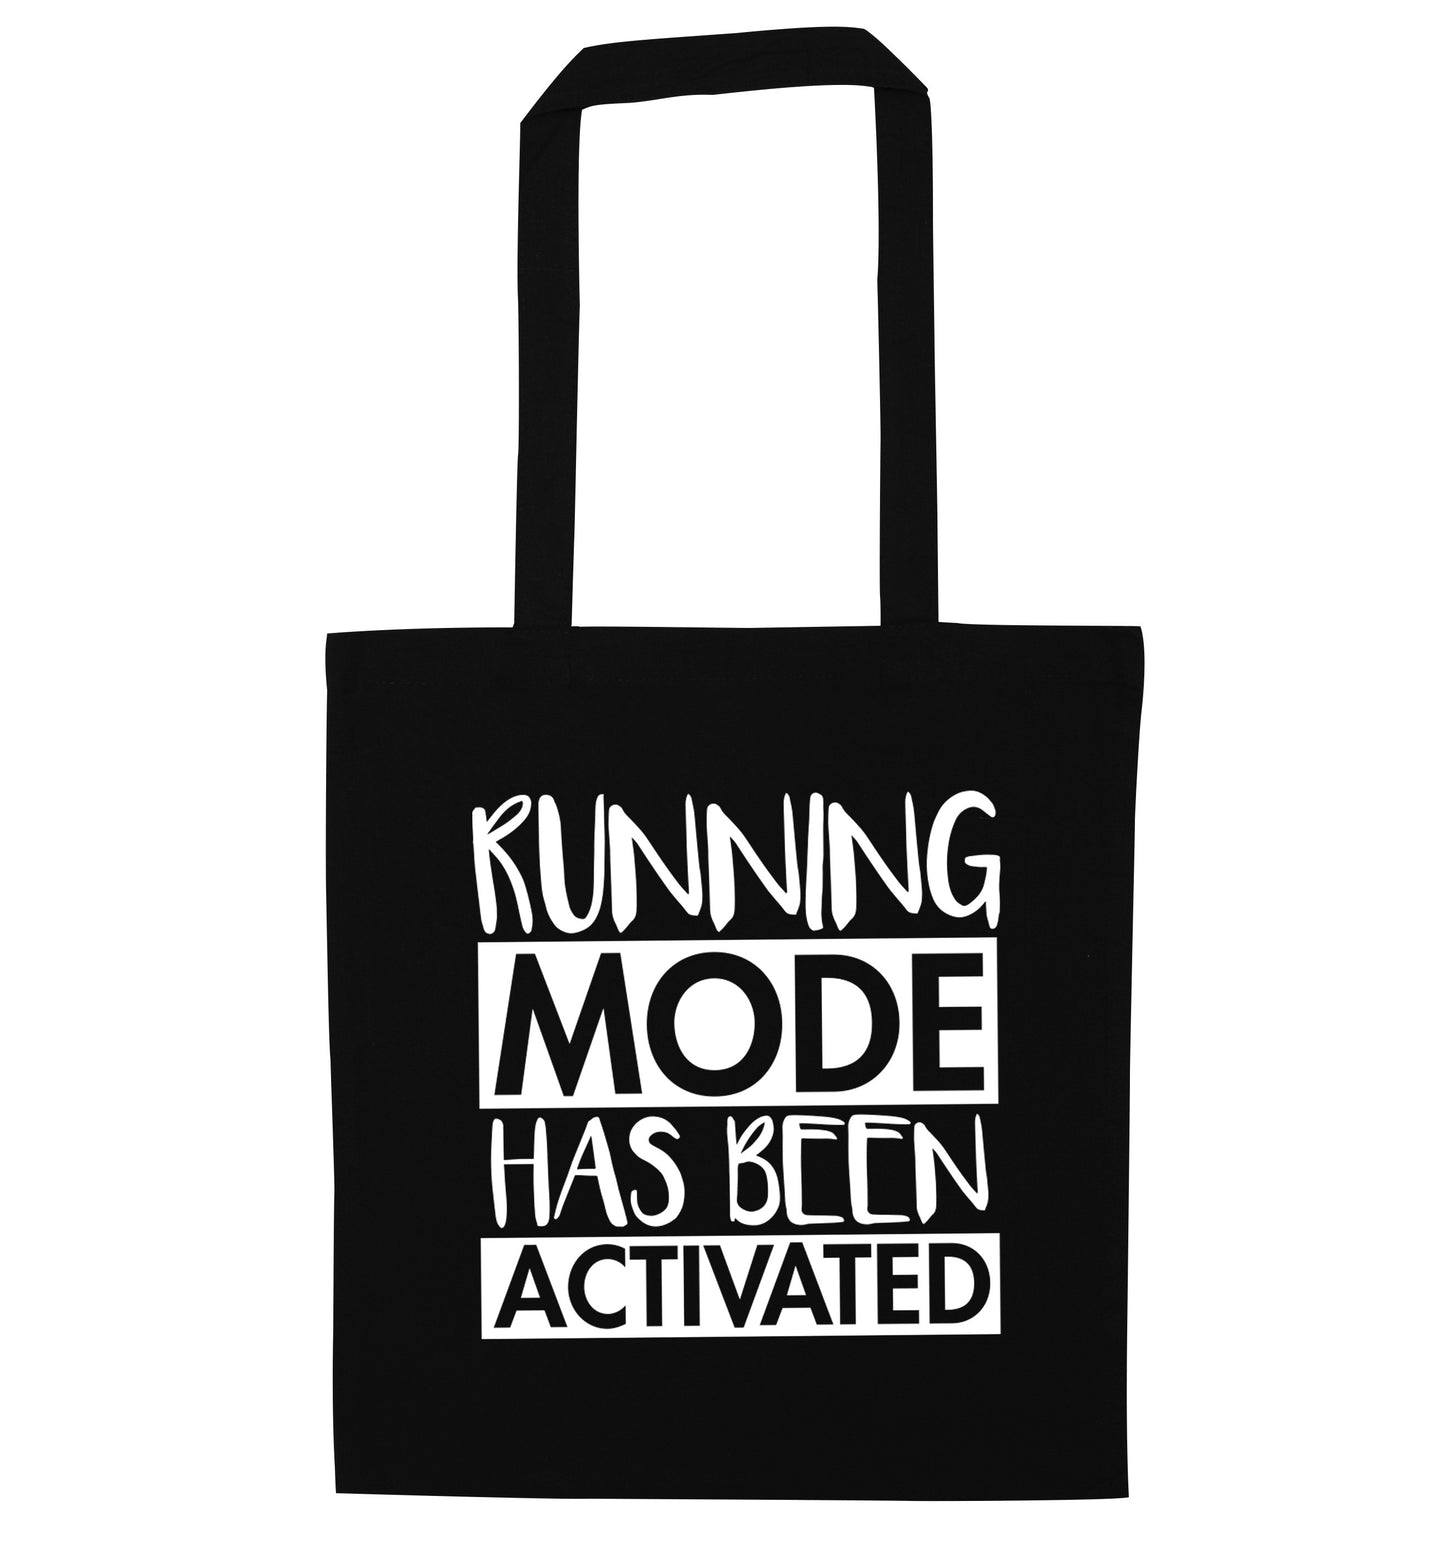 Running mode activated black tote bag